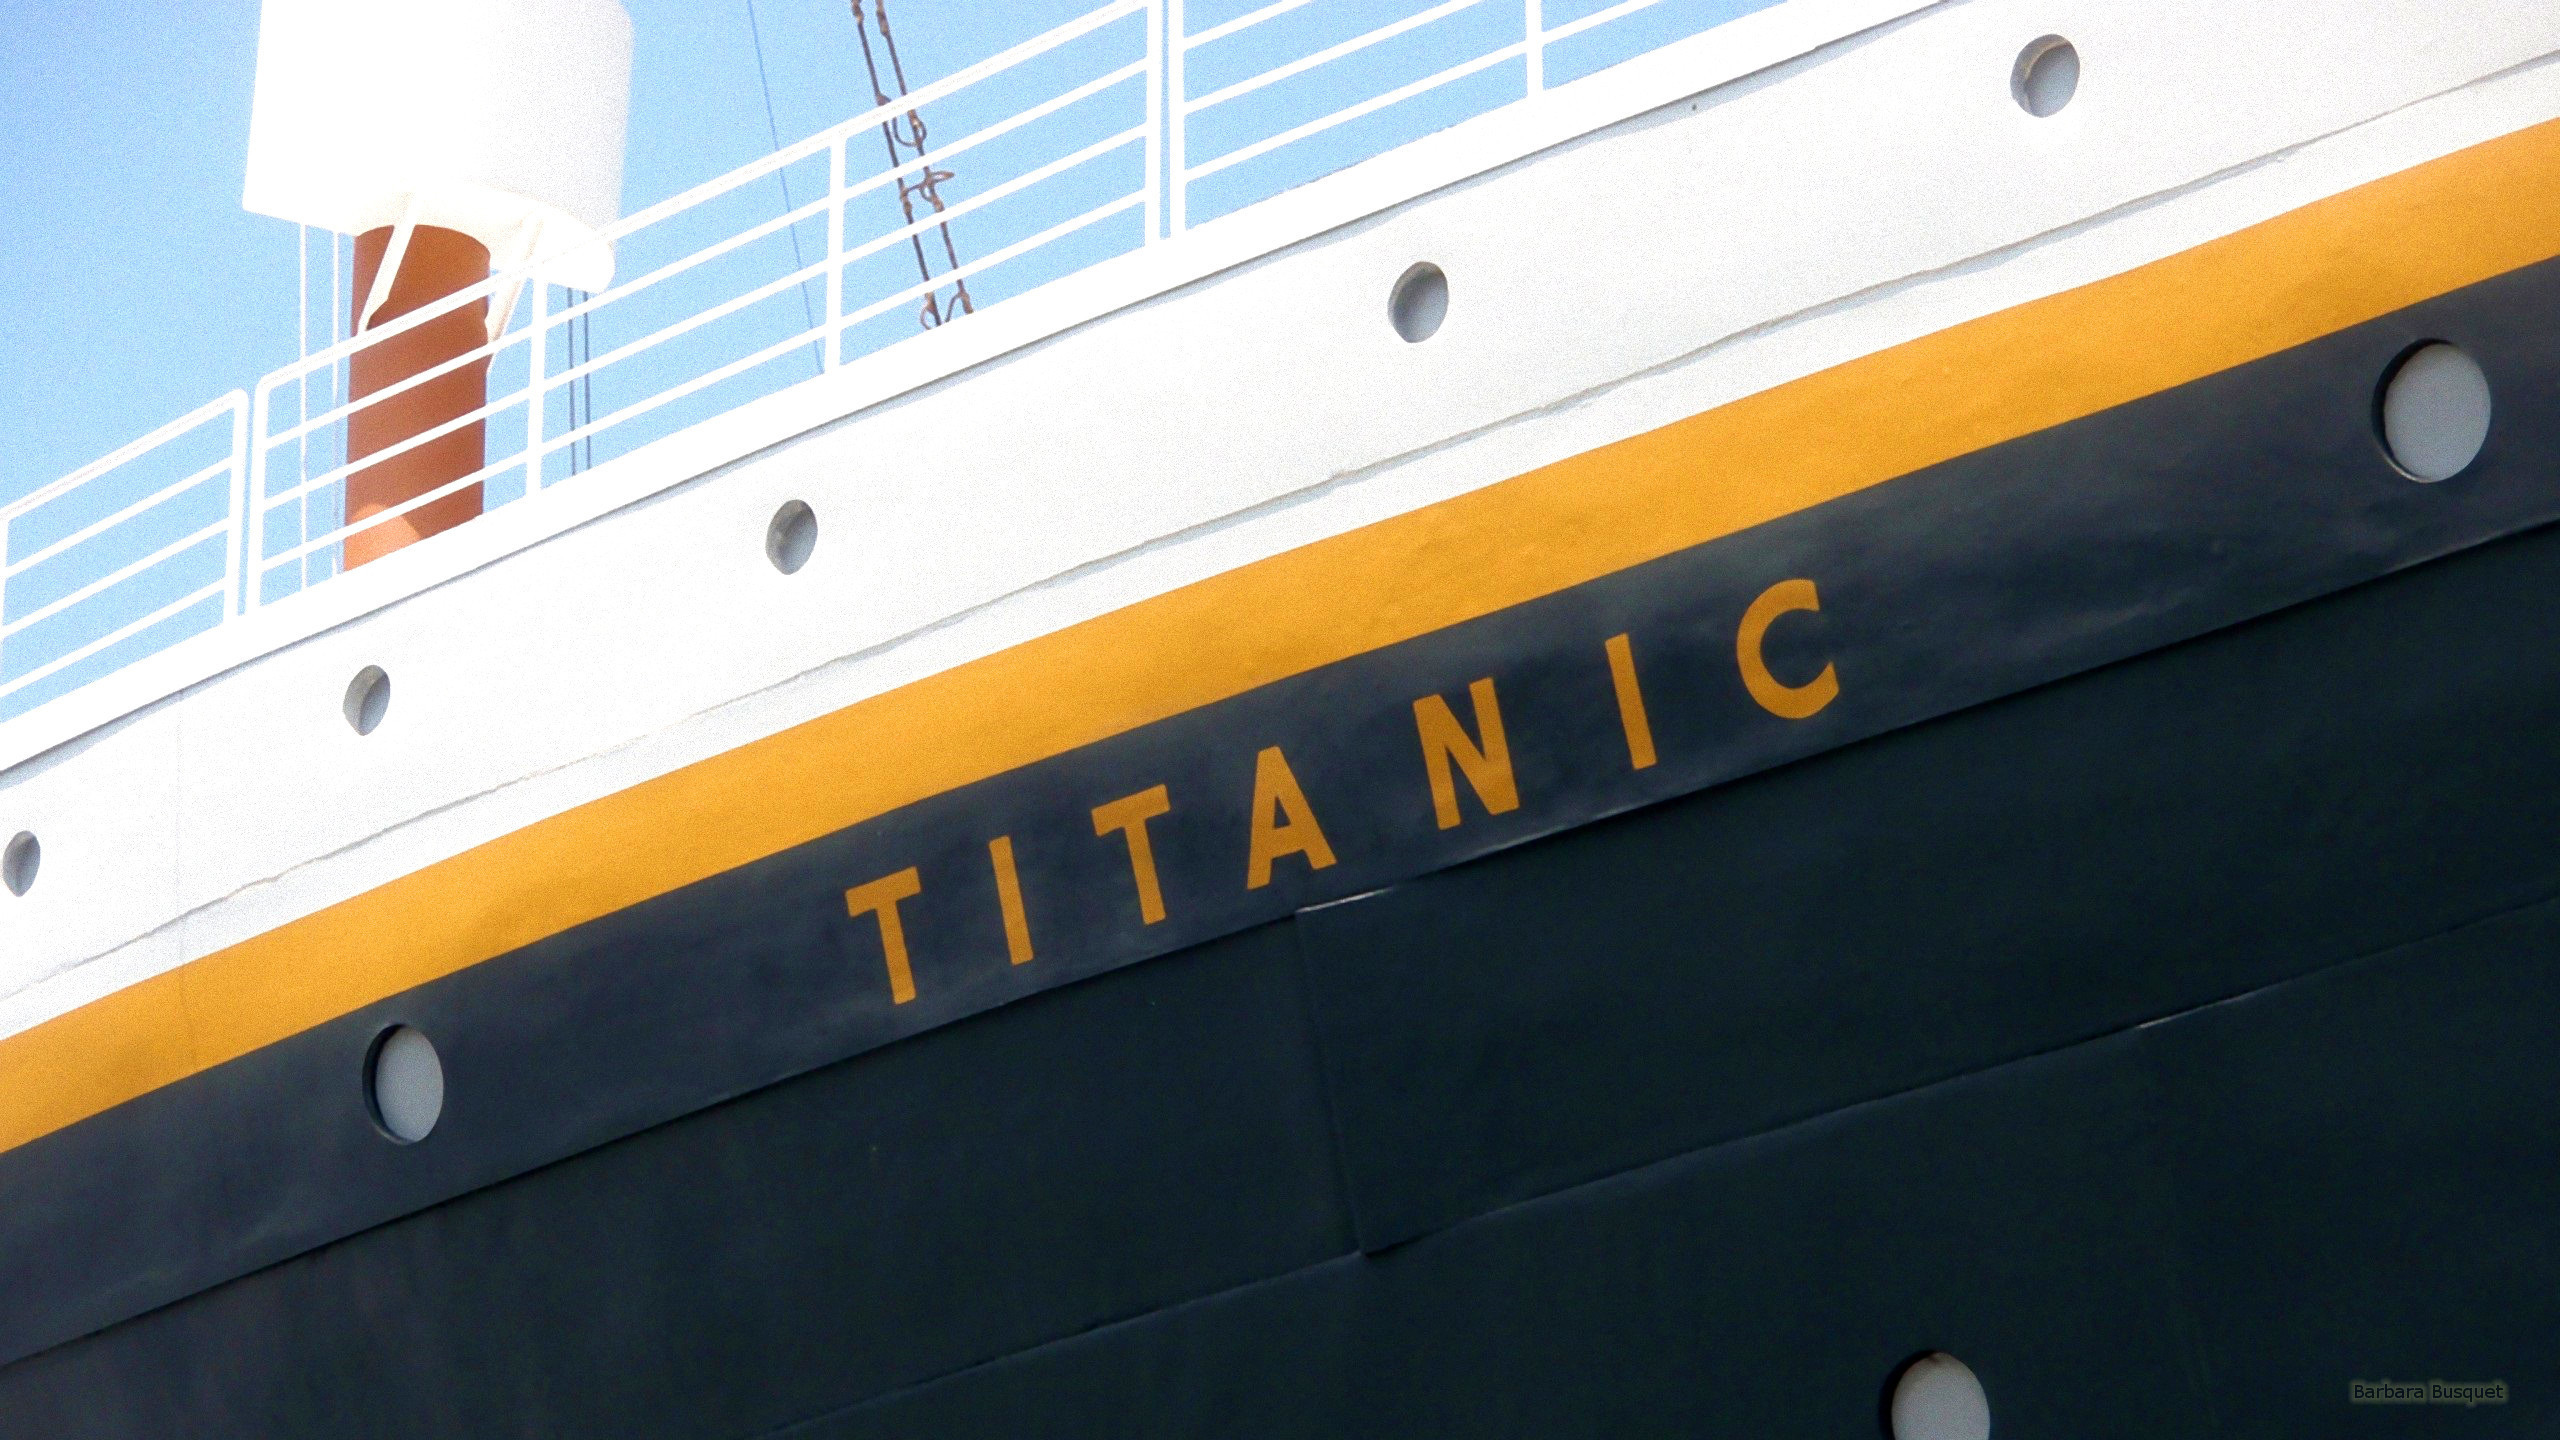 2560x1440  Titanic wallpaper with the name of the ship on the ship.